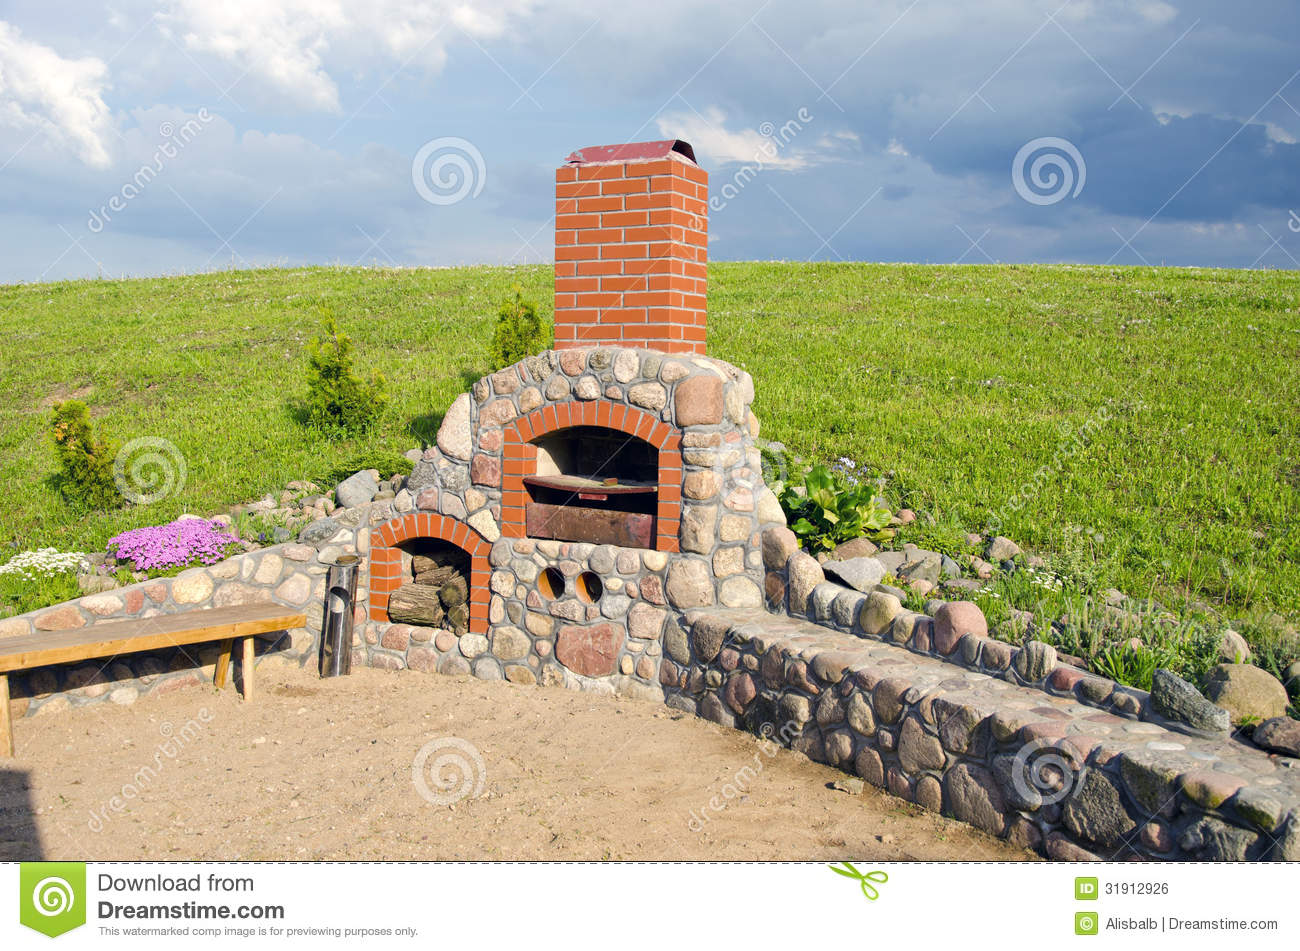 Summer Outdoor Fireplace In Garden Royalty Free Stock Image   Image